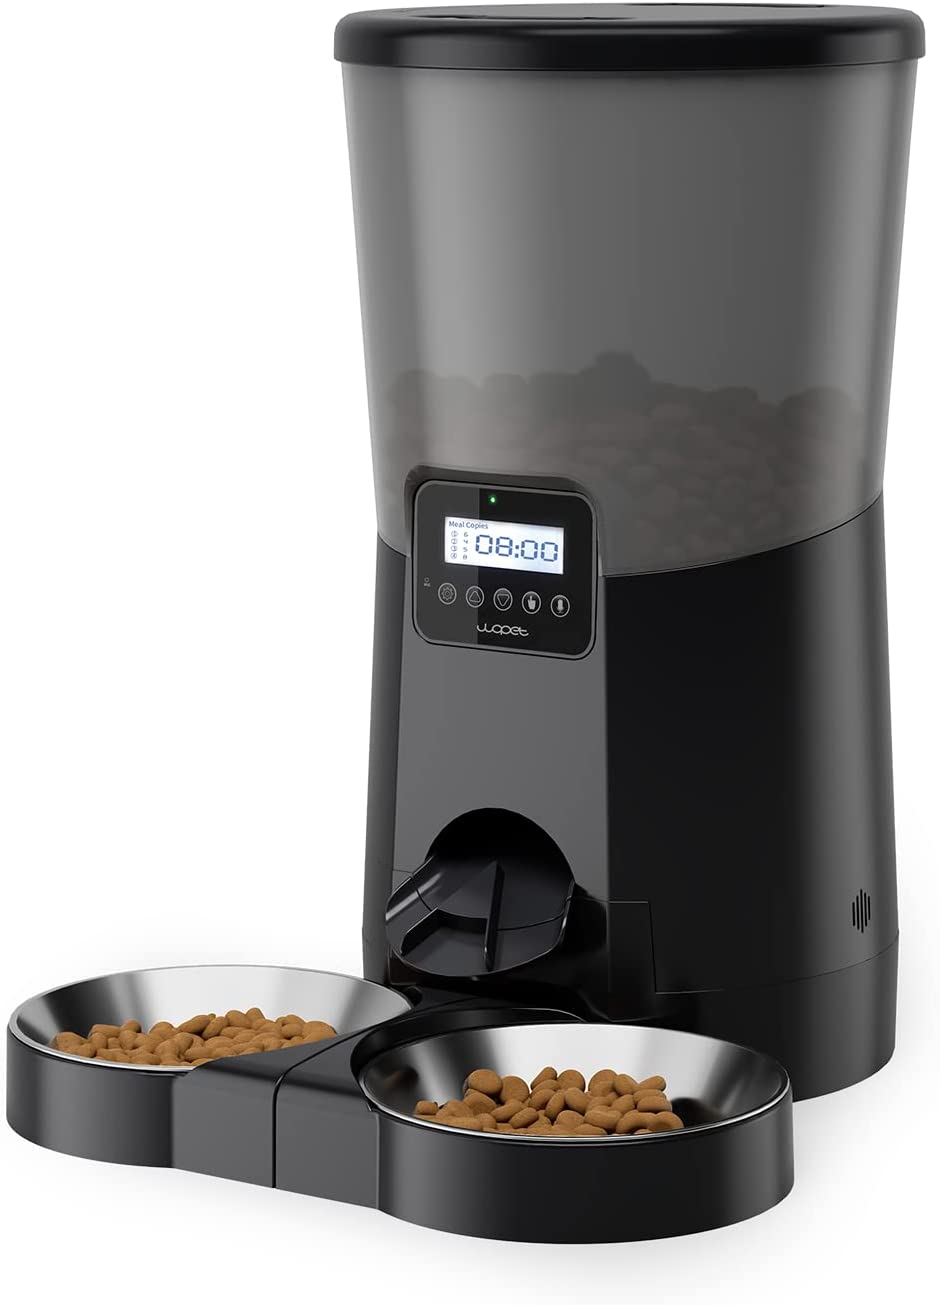 WOPET Automatic Dog Feeder,8L Pet Food Dispenser for Two Cats and Dogs